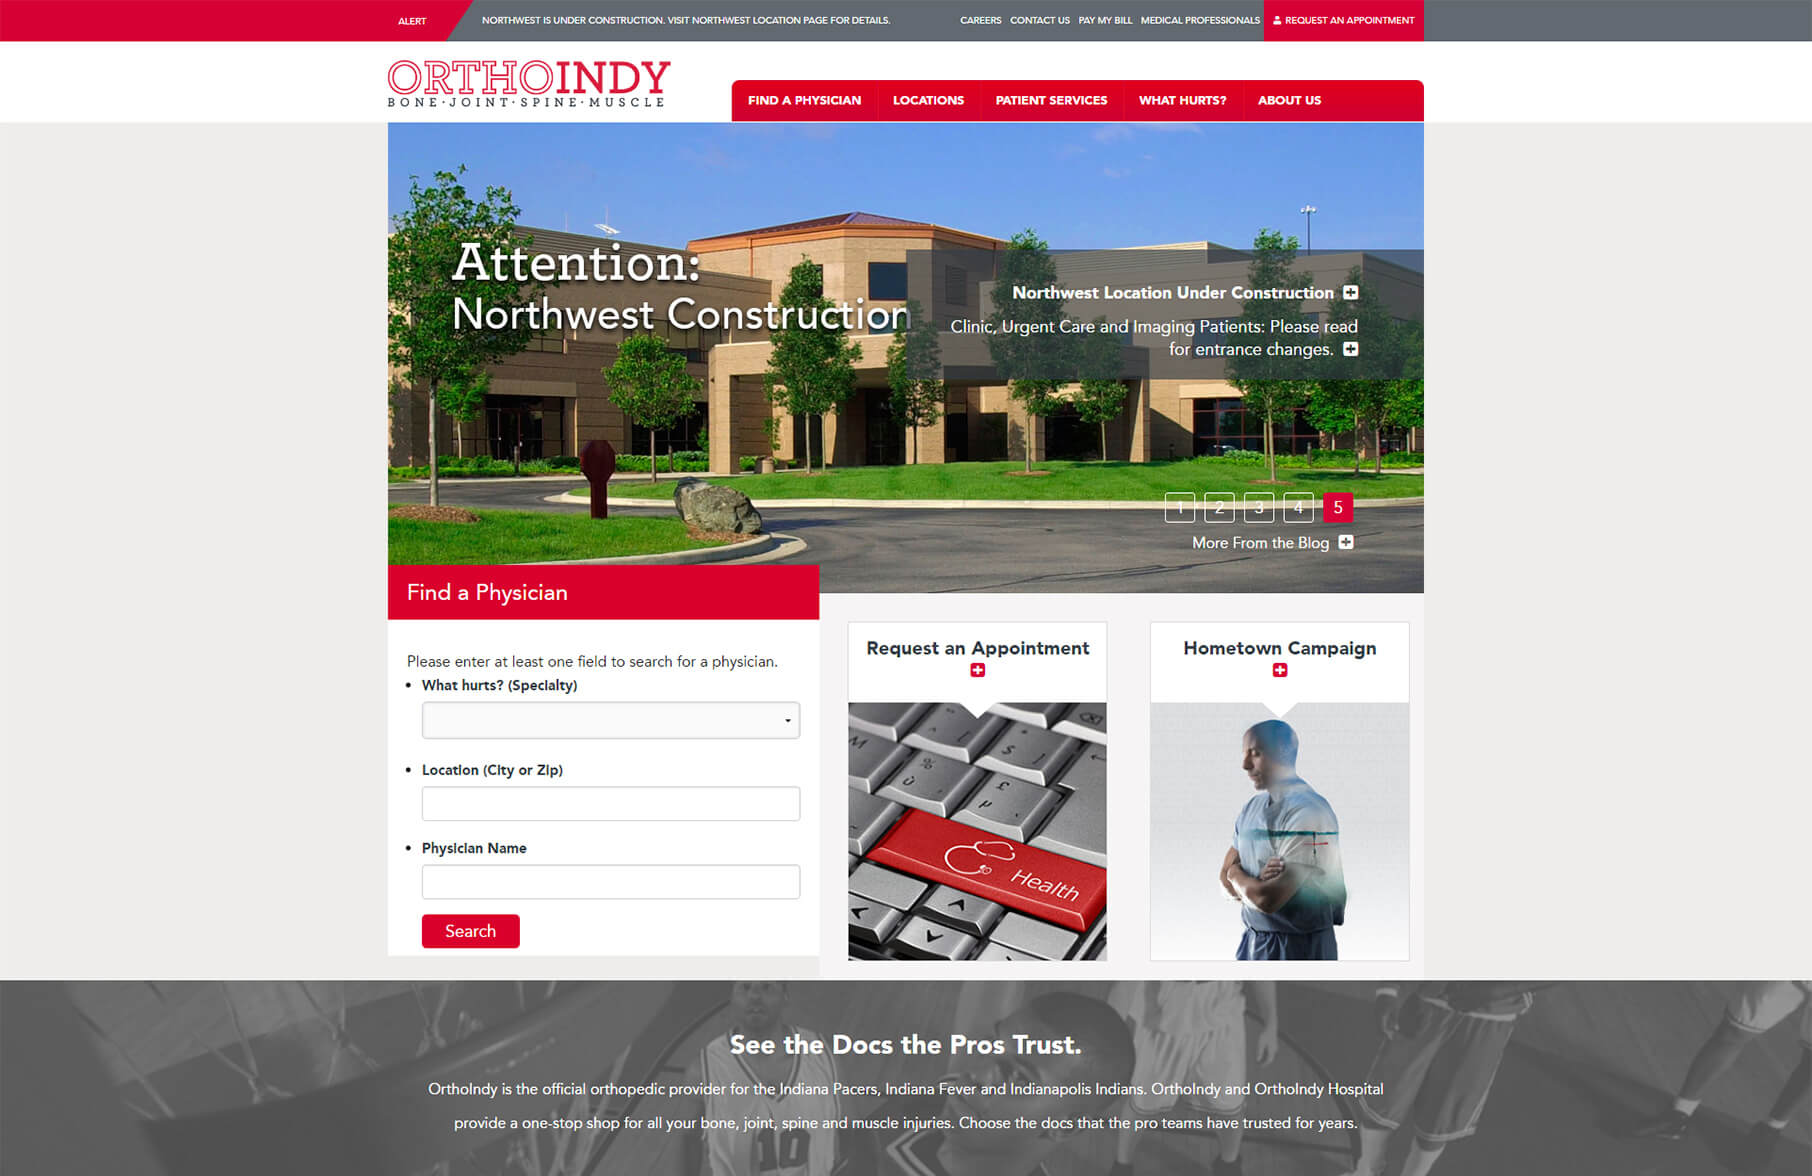 OrthoIndy website home page before redesign